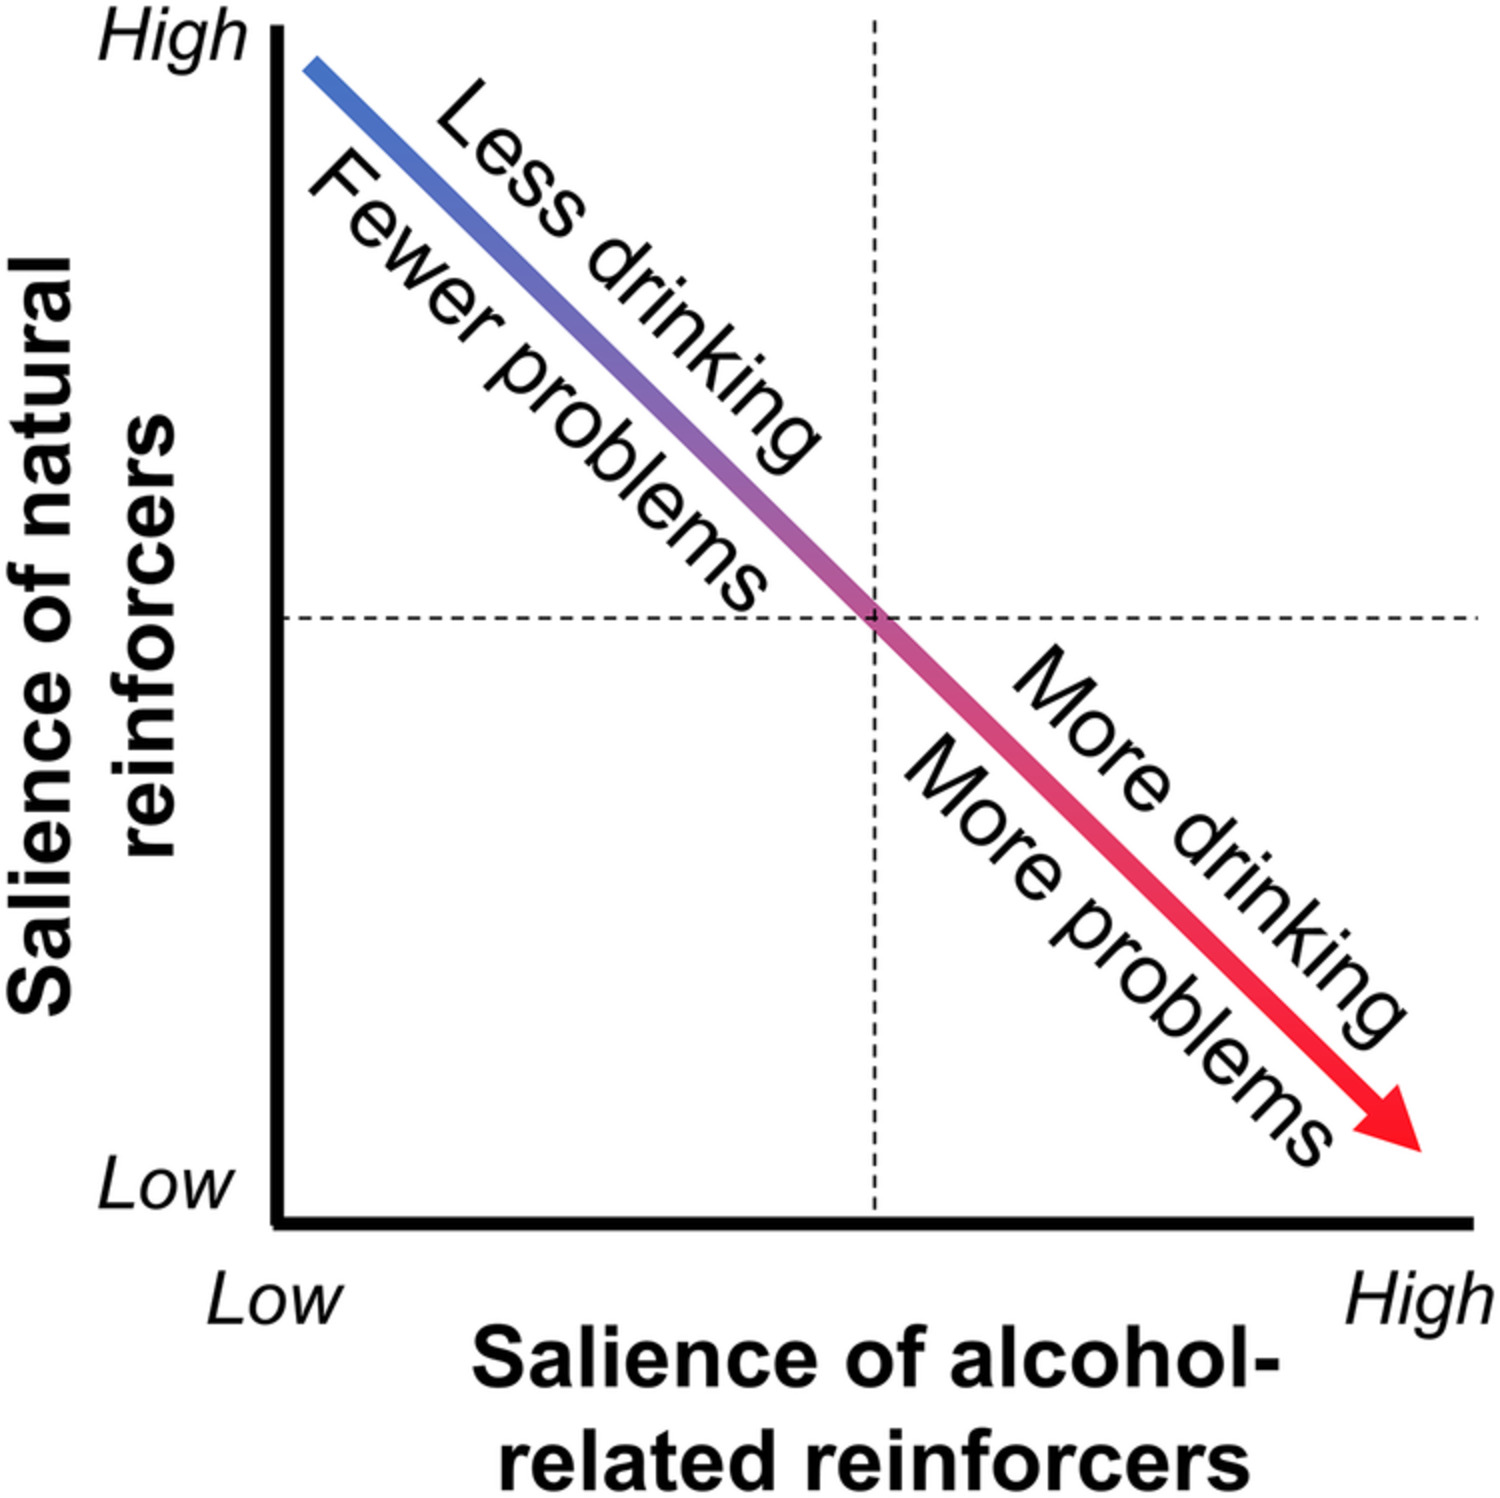 Differential brain responses to alcohol‐related and natural rewards are associated with alcohol use and problems: Evidence for reward dysregulation